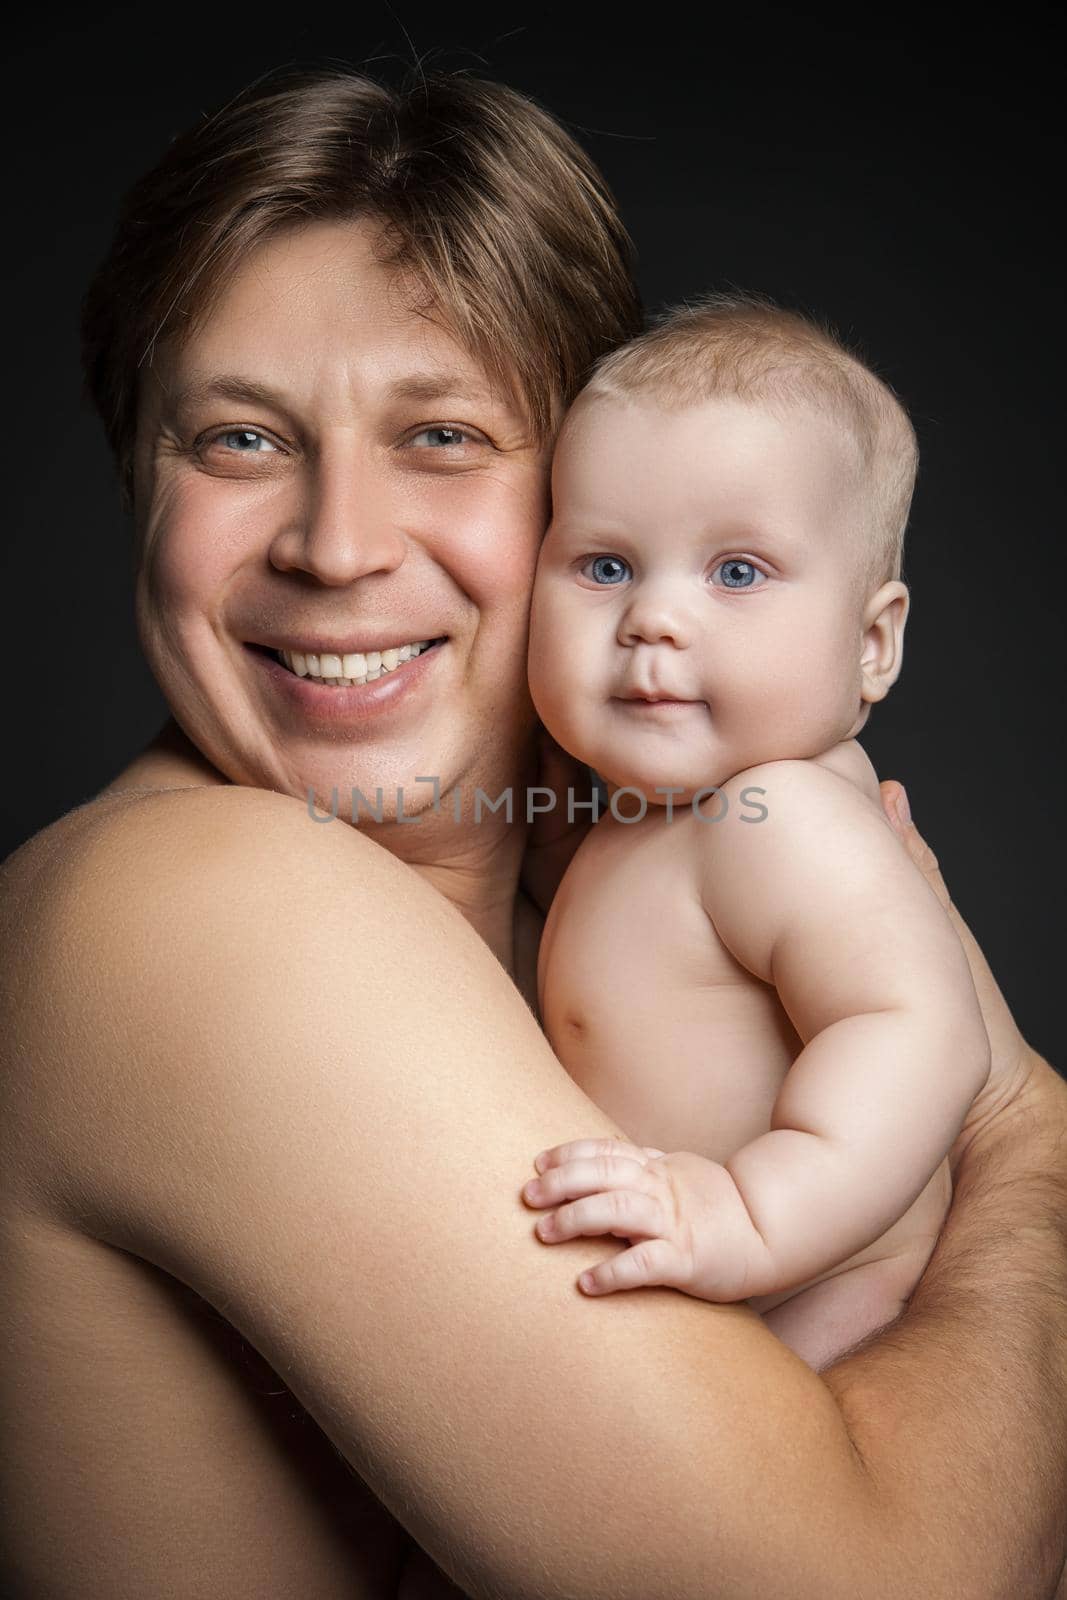 Father holding toddler son both looking at the camera. Both are smiling.